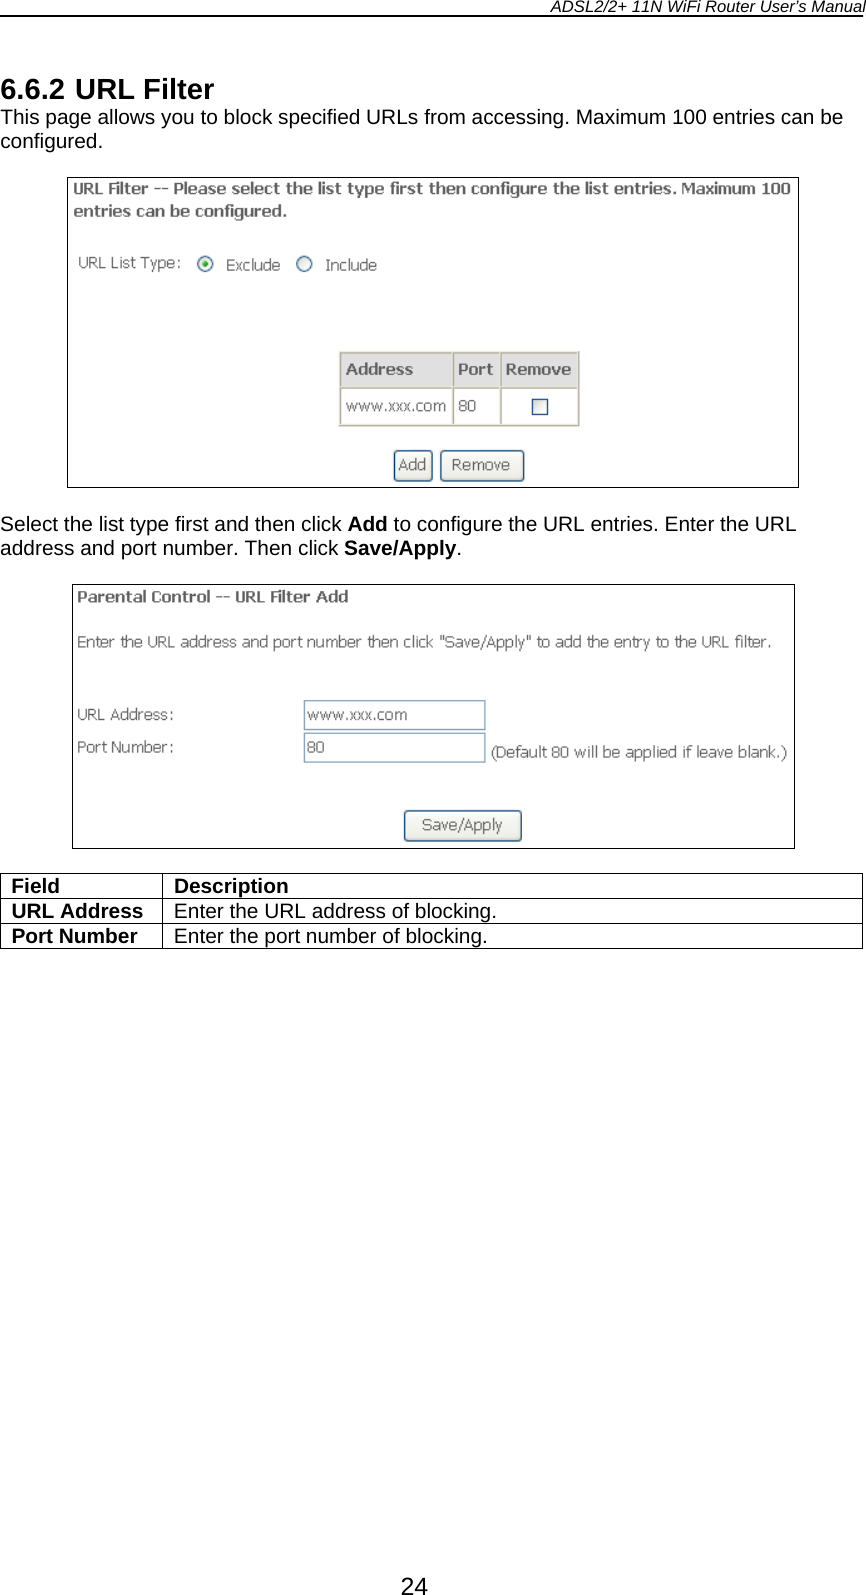 ADSL2/2+ 11N WiFi Router User’s Manual  24 6.6.2 URL Filter This page allows you to block specified URLs from accessing. Maximum 100 entries can be configured.    Select the list type first and then click Add to configure the URL entries. Enter the URL address and port number. Then click Save/Apply.    Field Description URL Address  Enter the URL address of blocking. Port Number  Enter the port number of blocking.  